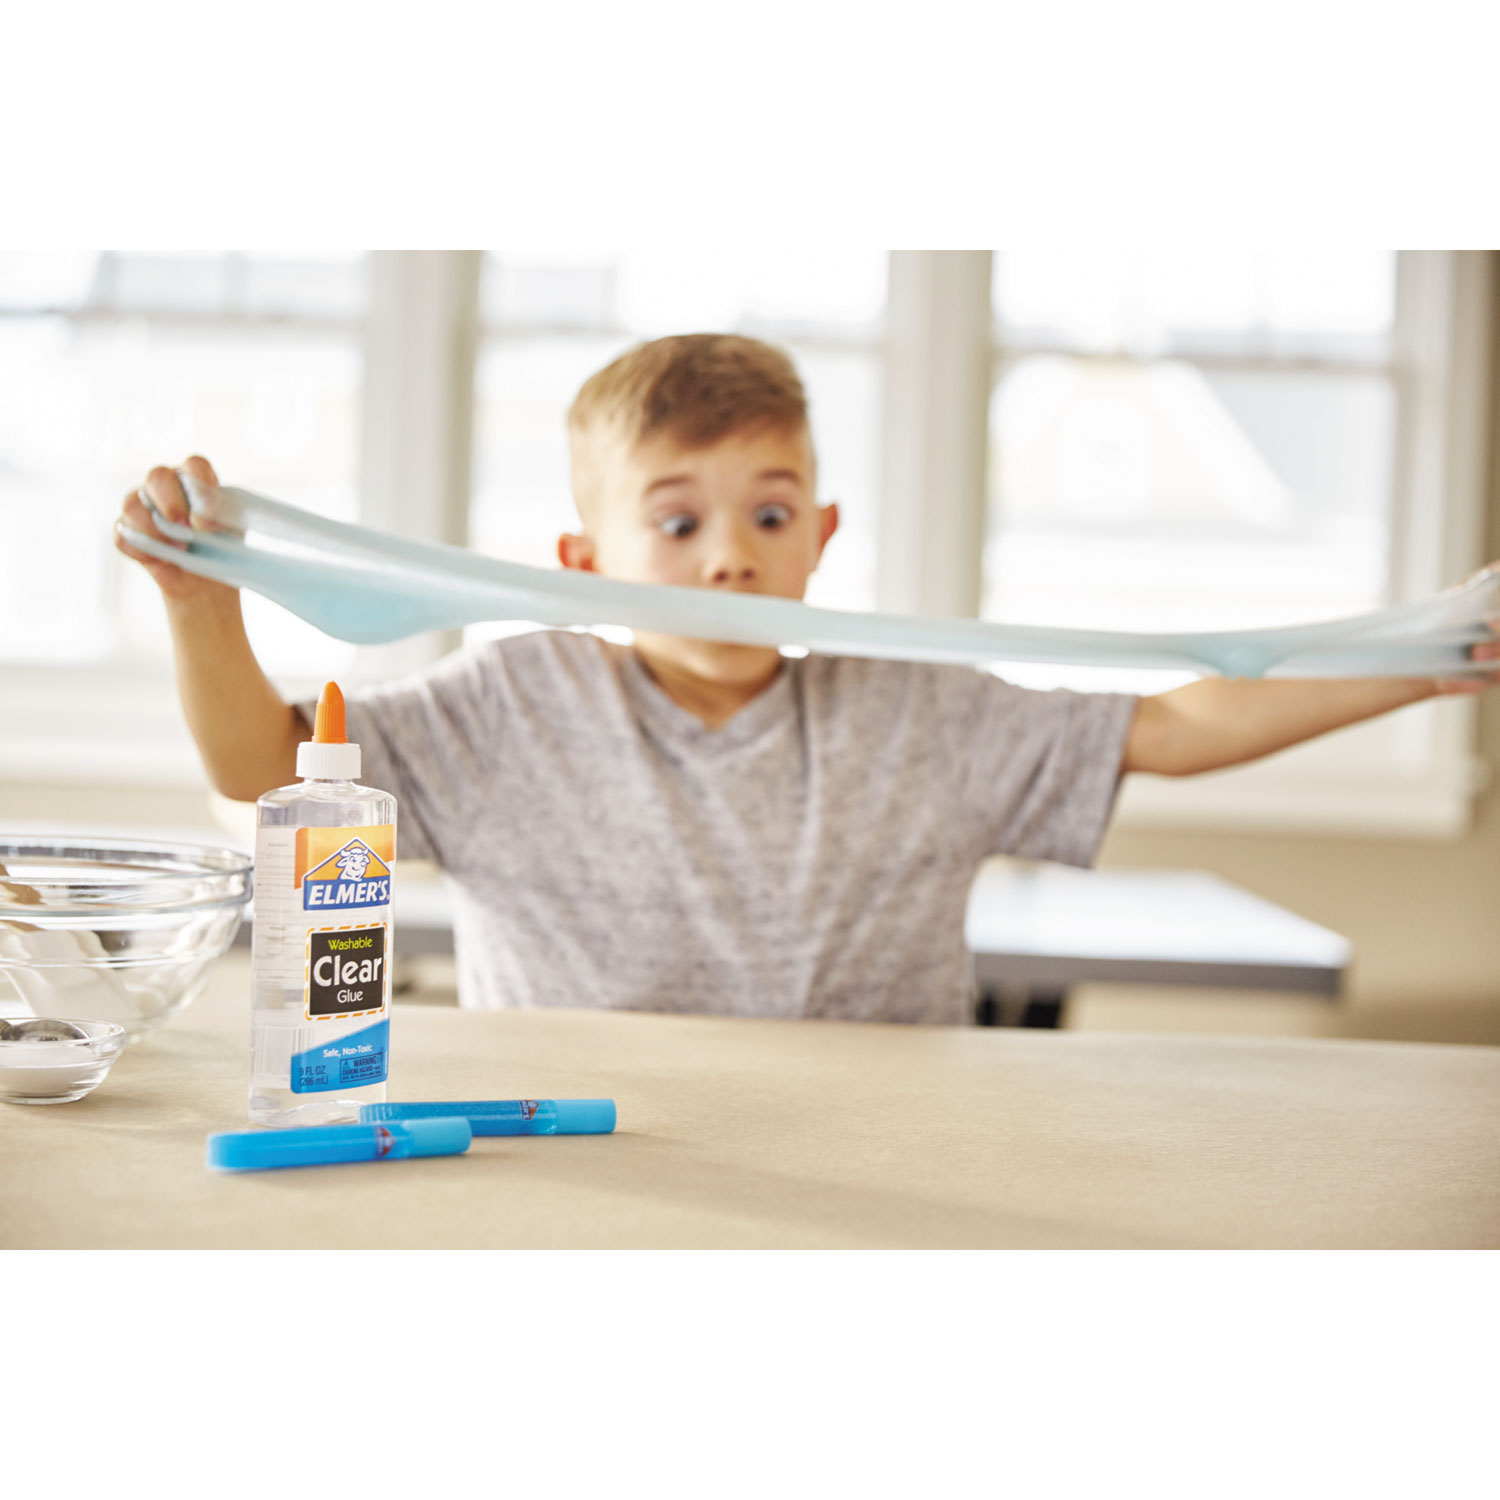 Washable School Glue, 5 oz, Dries Clear - Office Express Office Products